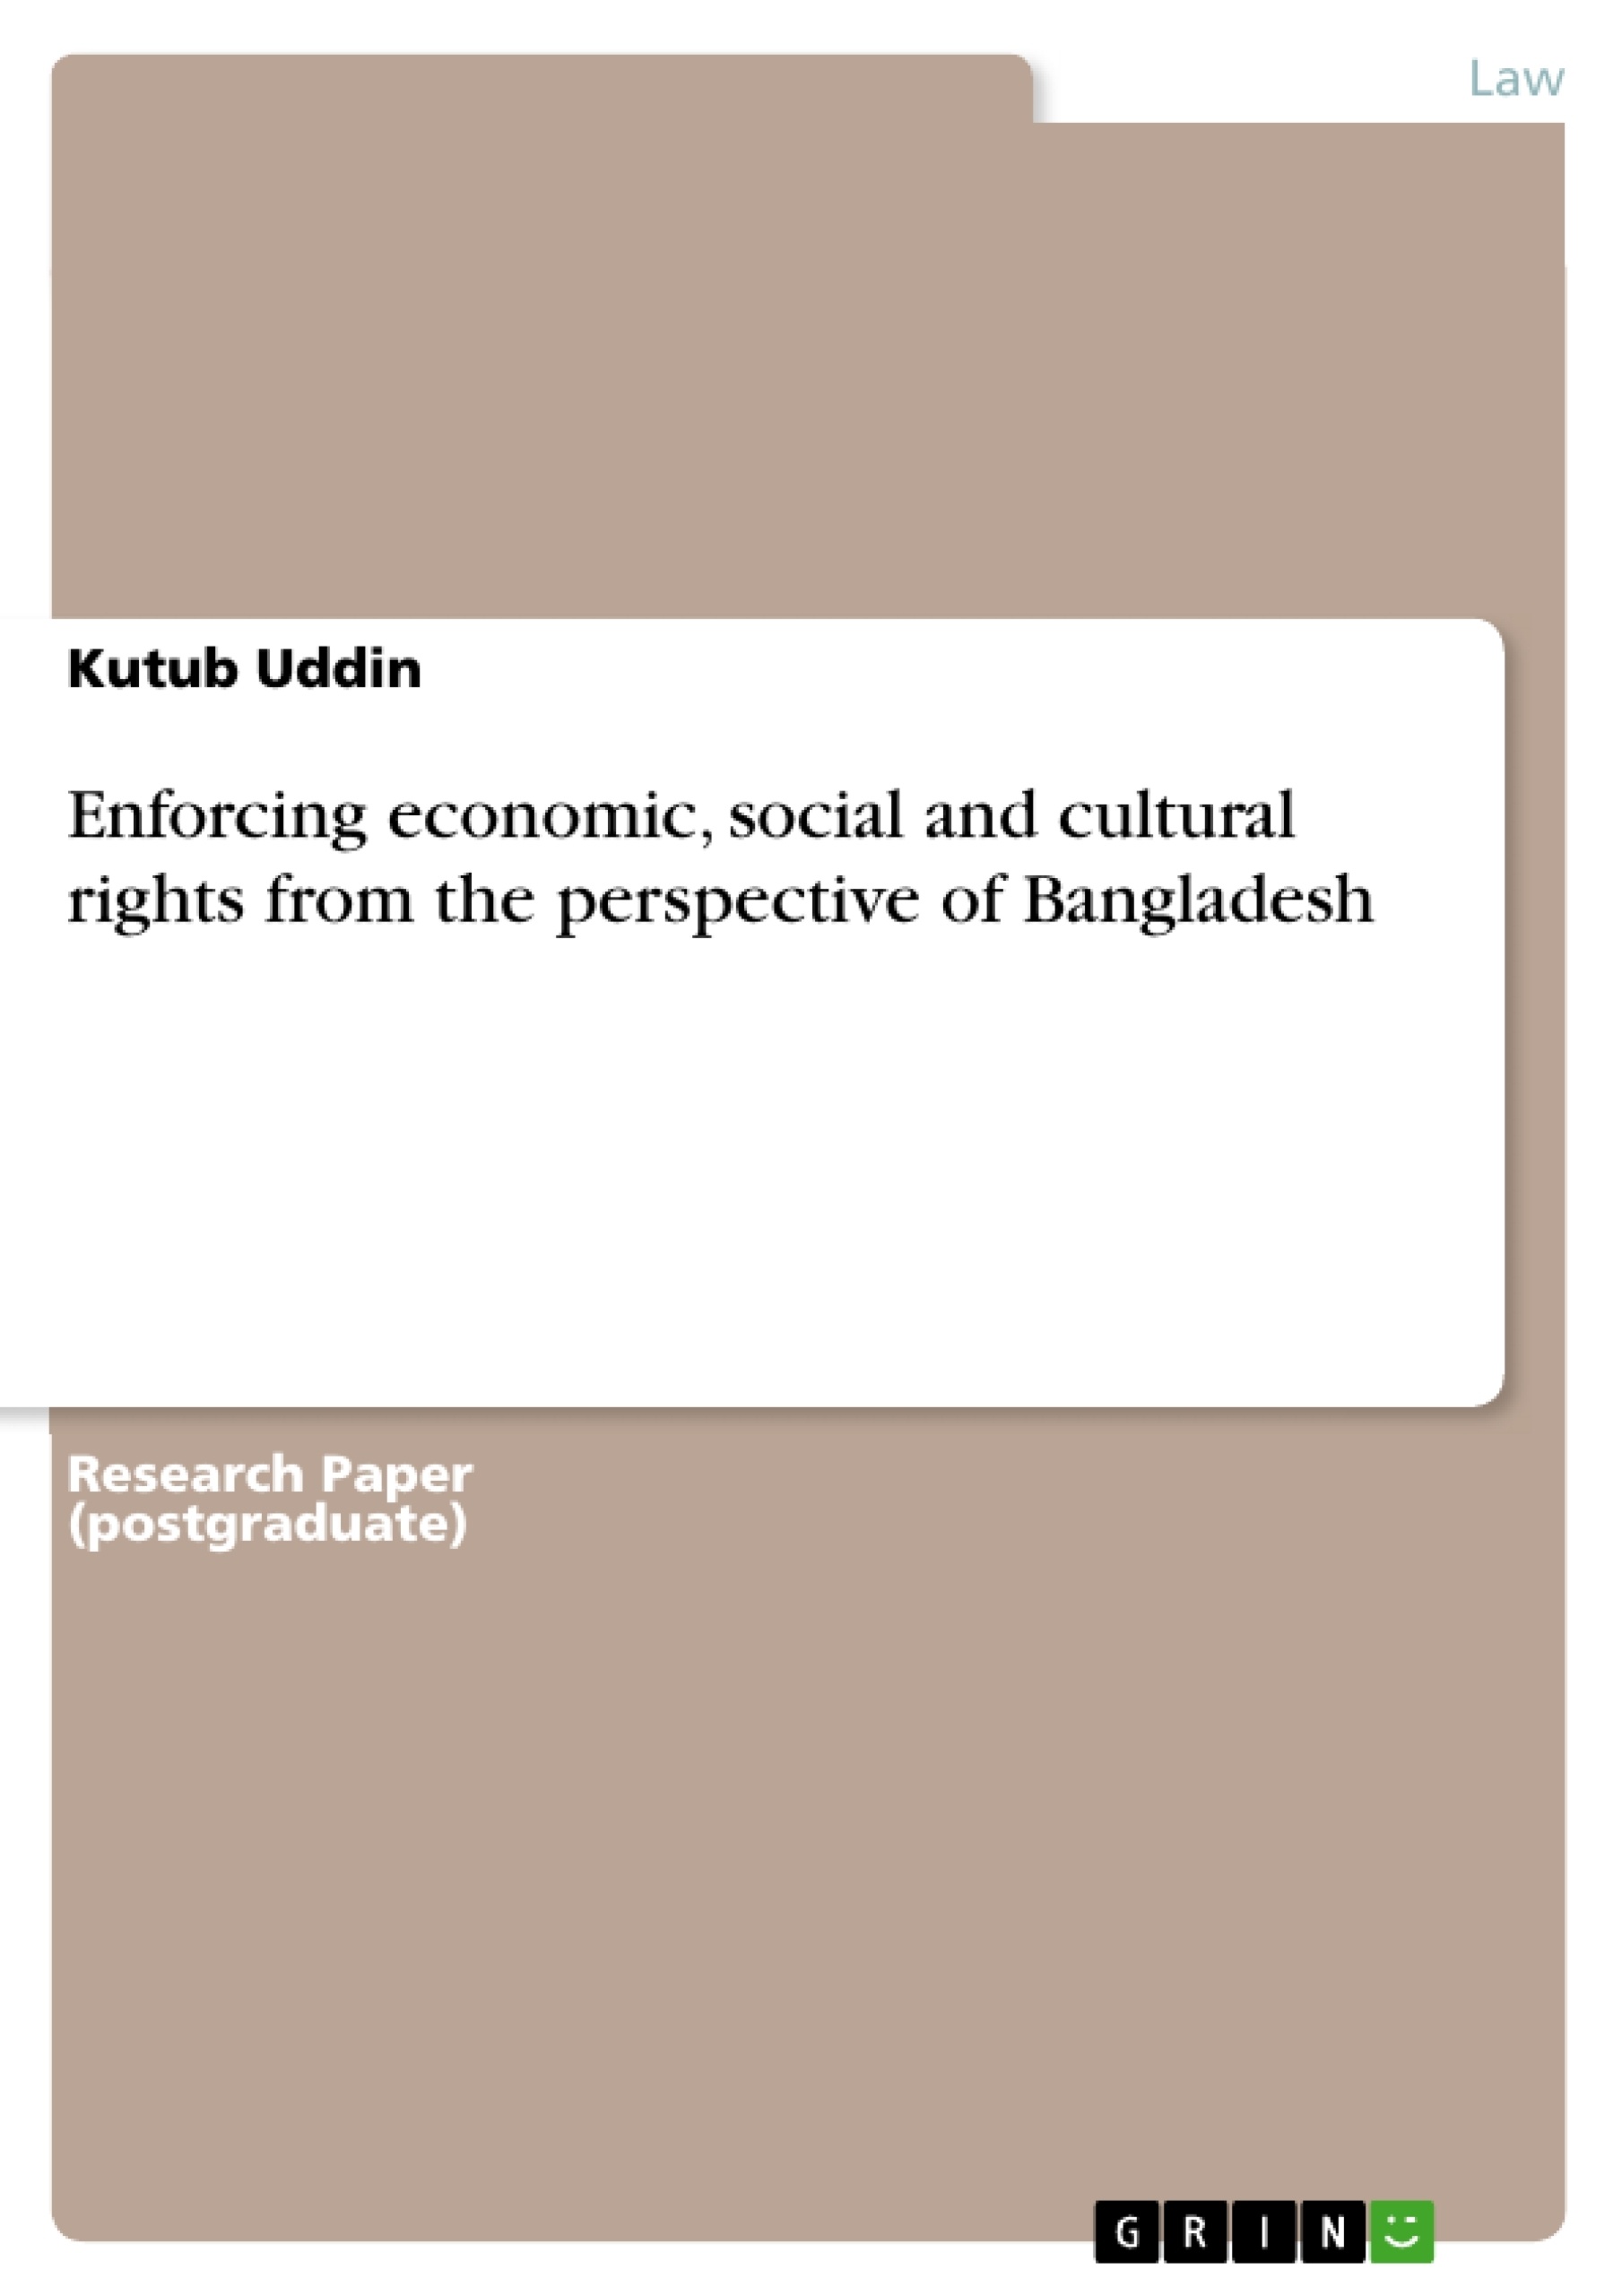 Título: Enforcing economic, social and cultural rights from the perspective of Bangladesh